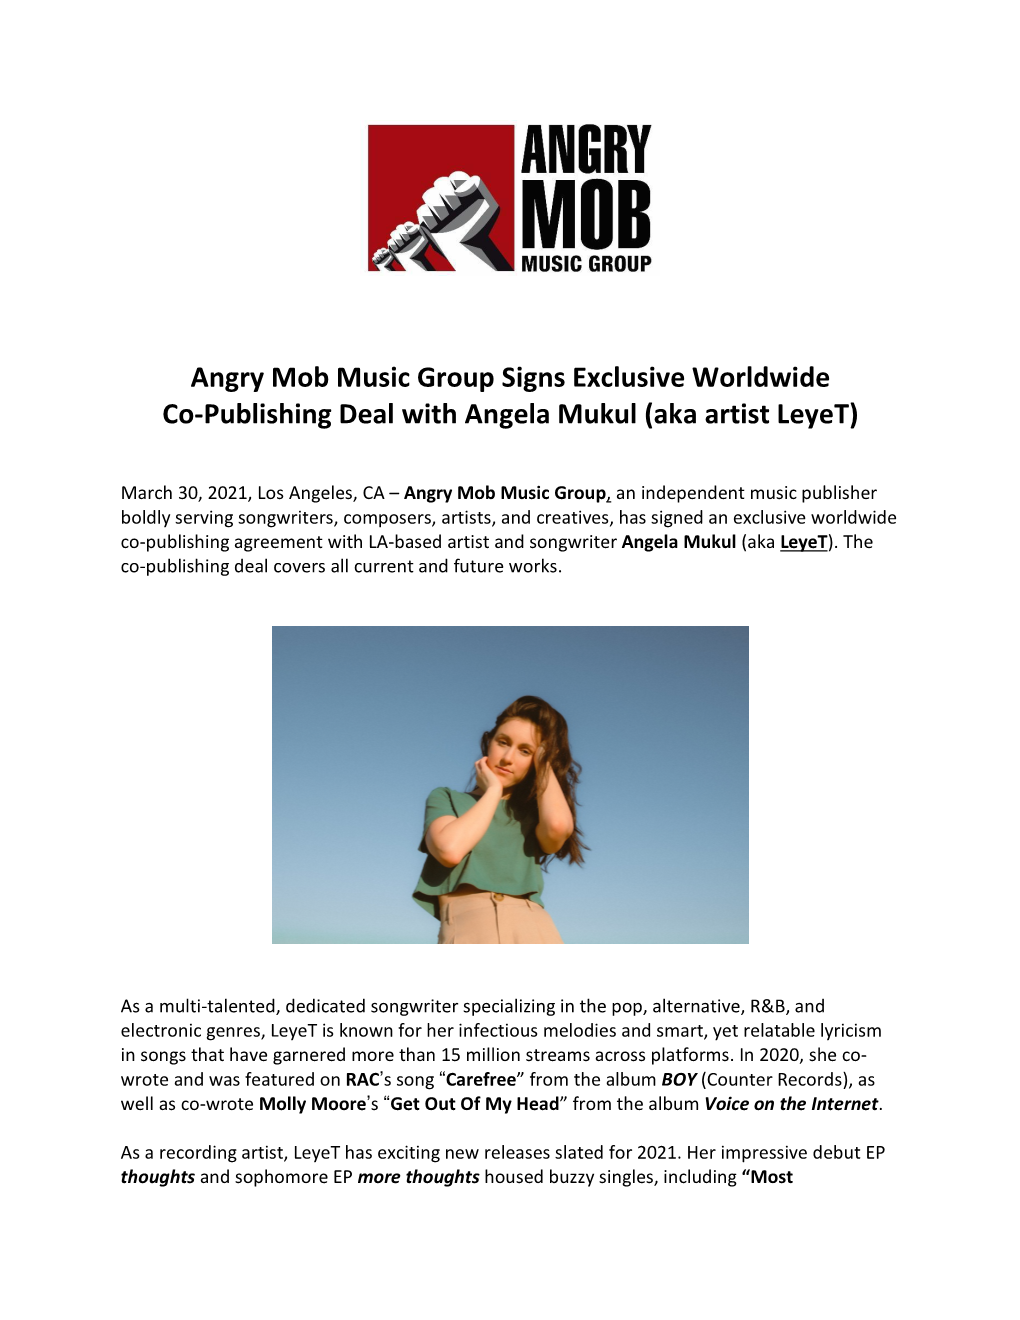 Angry Mob Music Group Signs Exclusive Worldwide Co-Publishing Deal with Angela Mukul (Aka Artist Leyet)